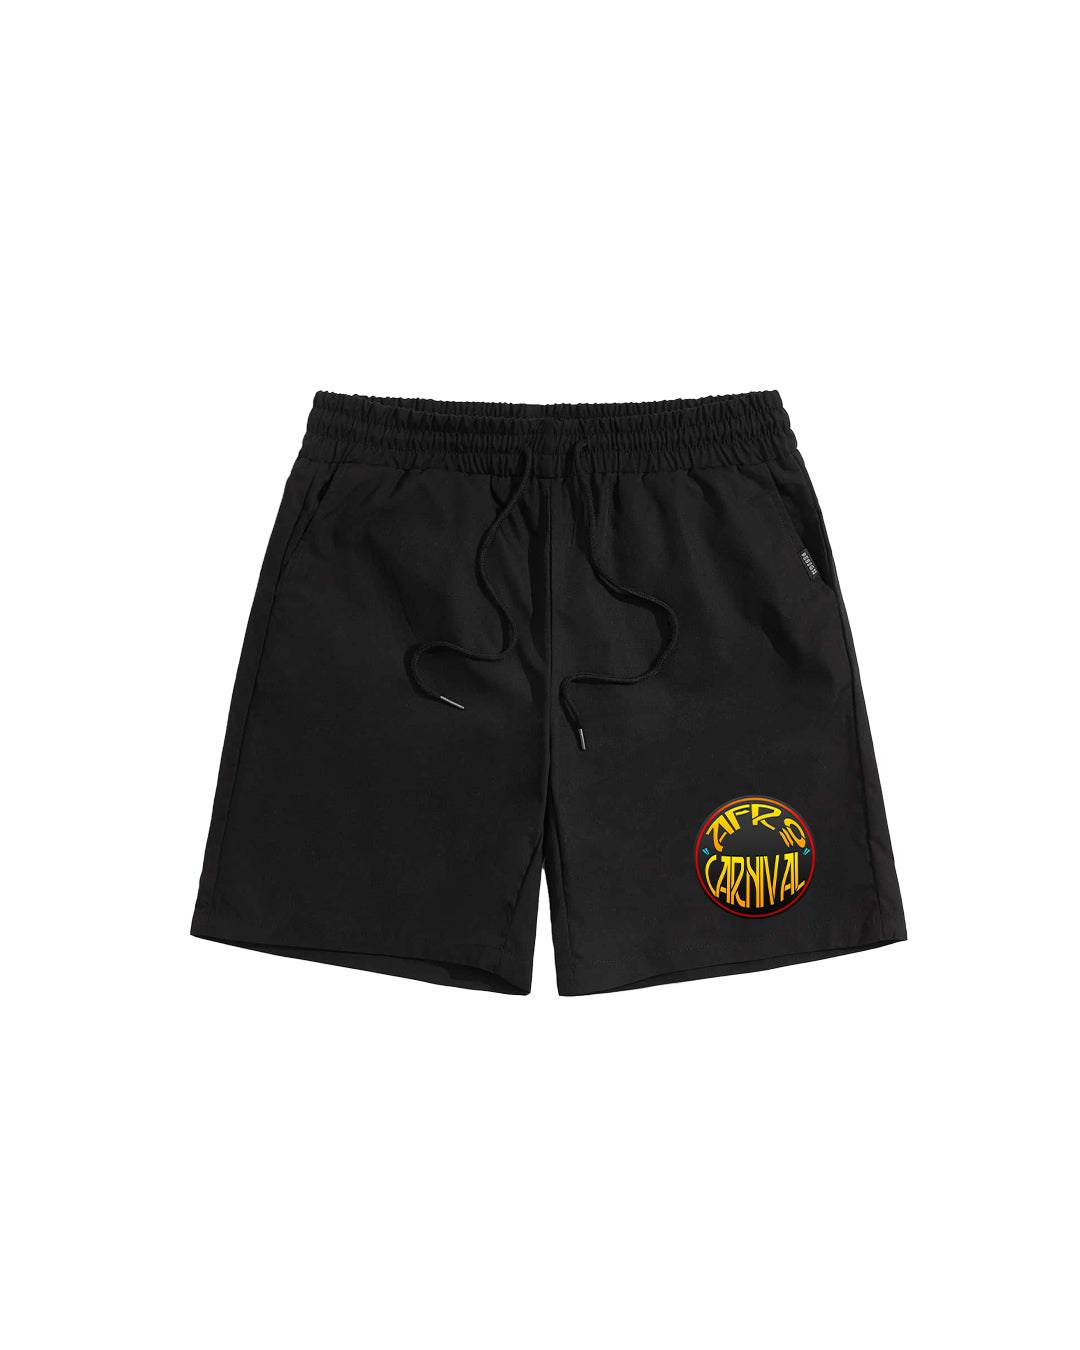 AFRO CARNIVAL SHORTS — yellow ac